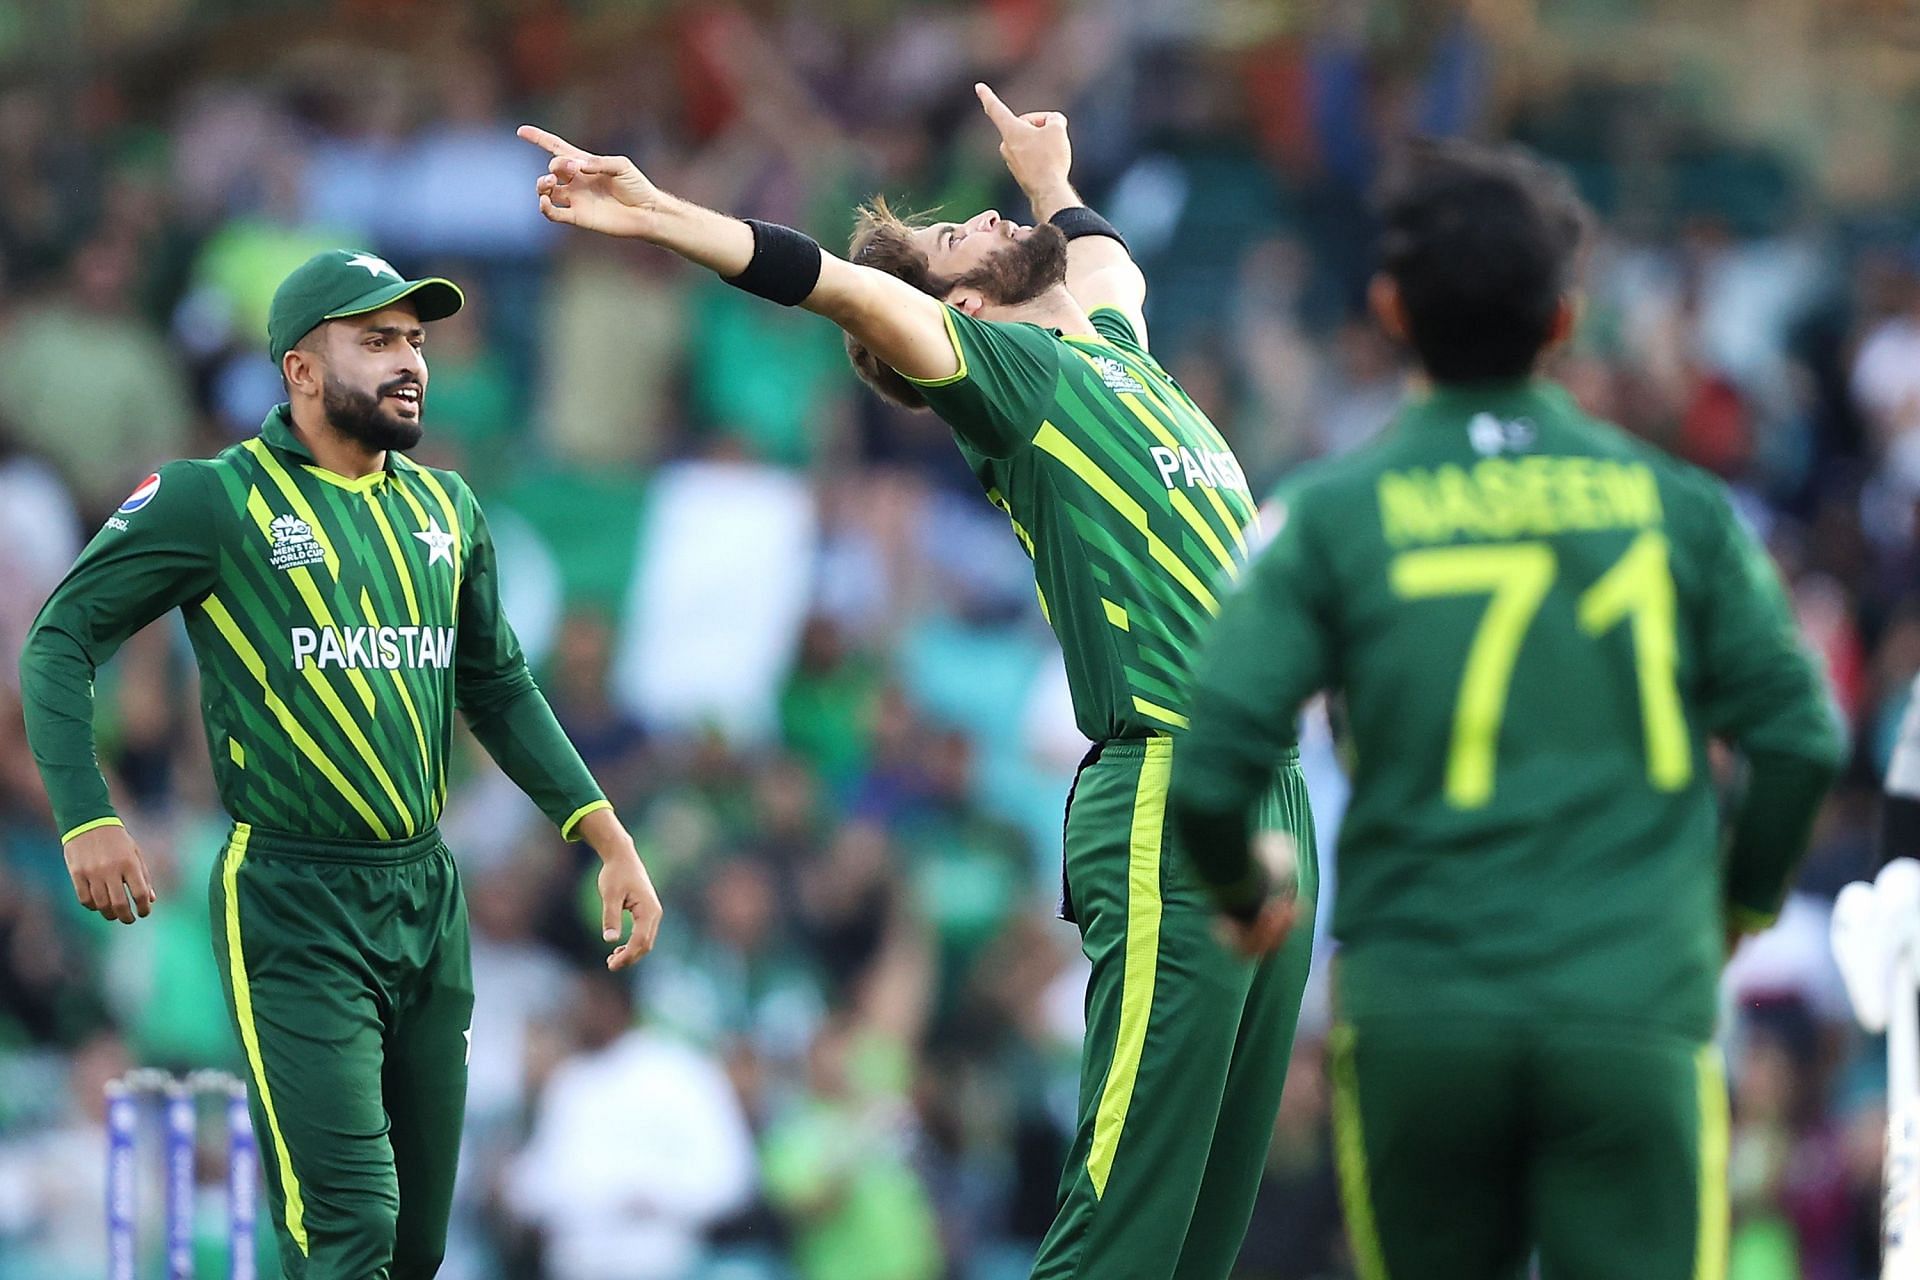 Shaheen Shah Afridi dismissed Finn Allen in the first over of the T20 World Cup semi-final.